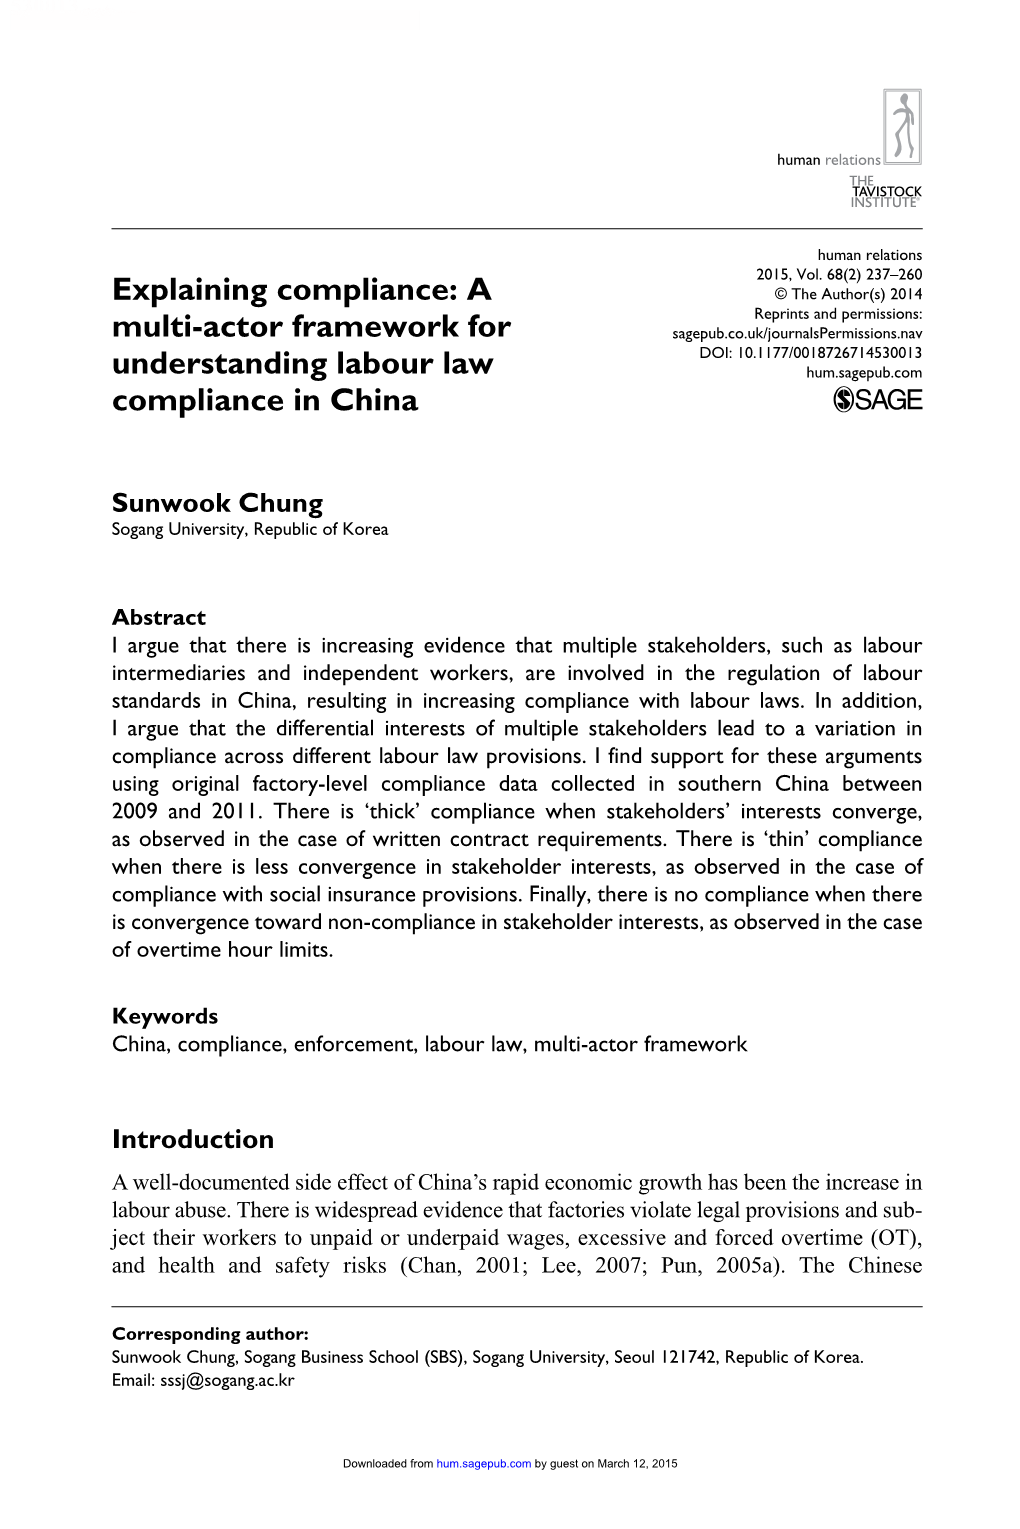 A Multi-Actor Framework for Understanding Labour Law Compliance in China